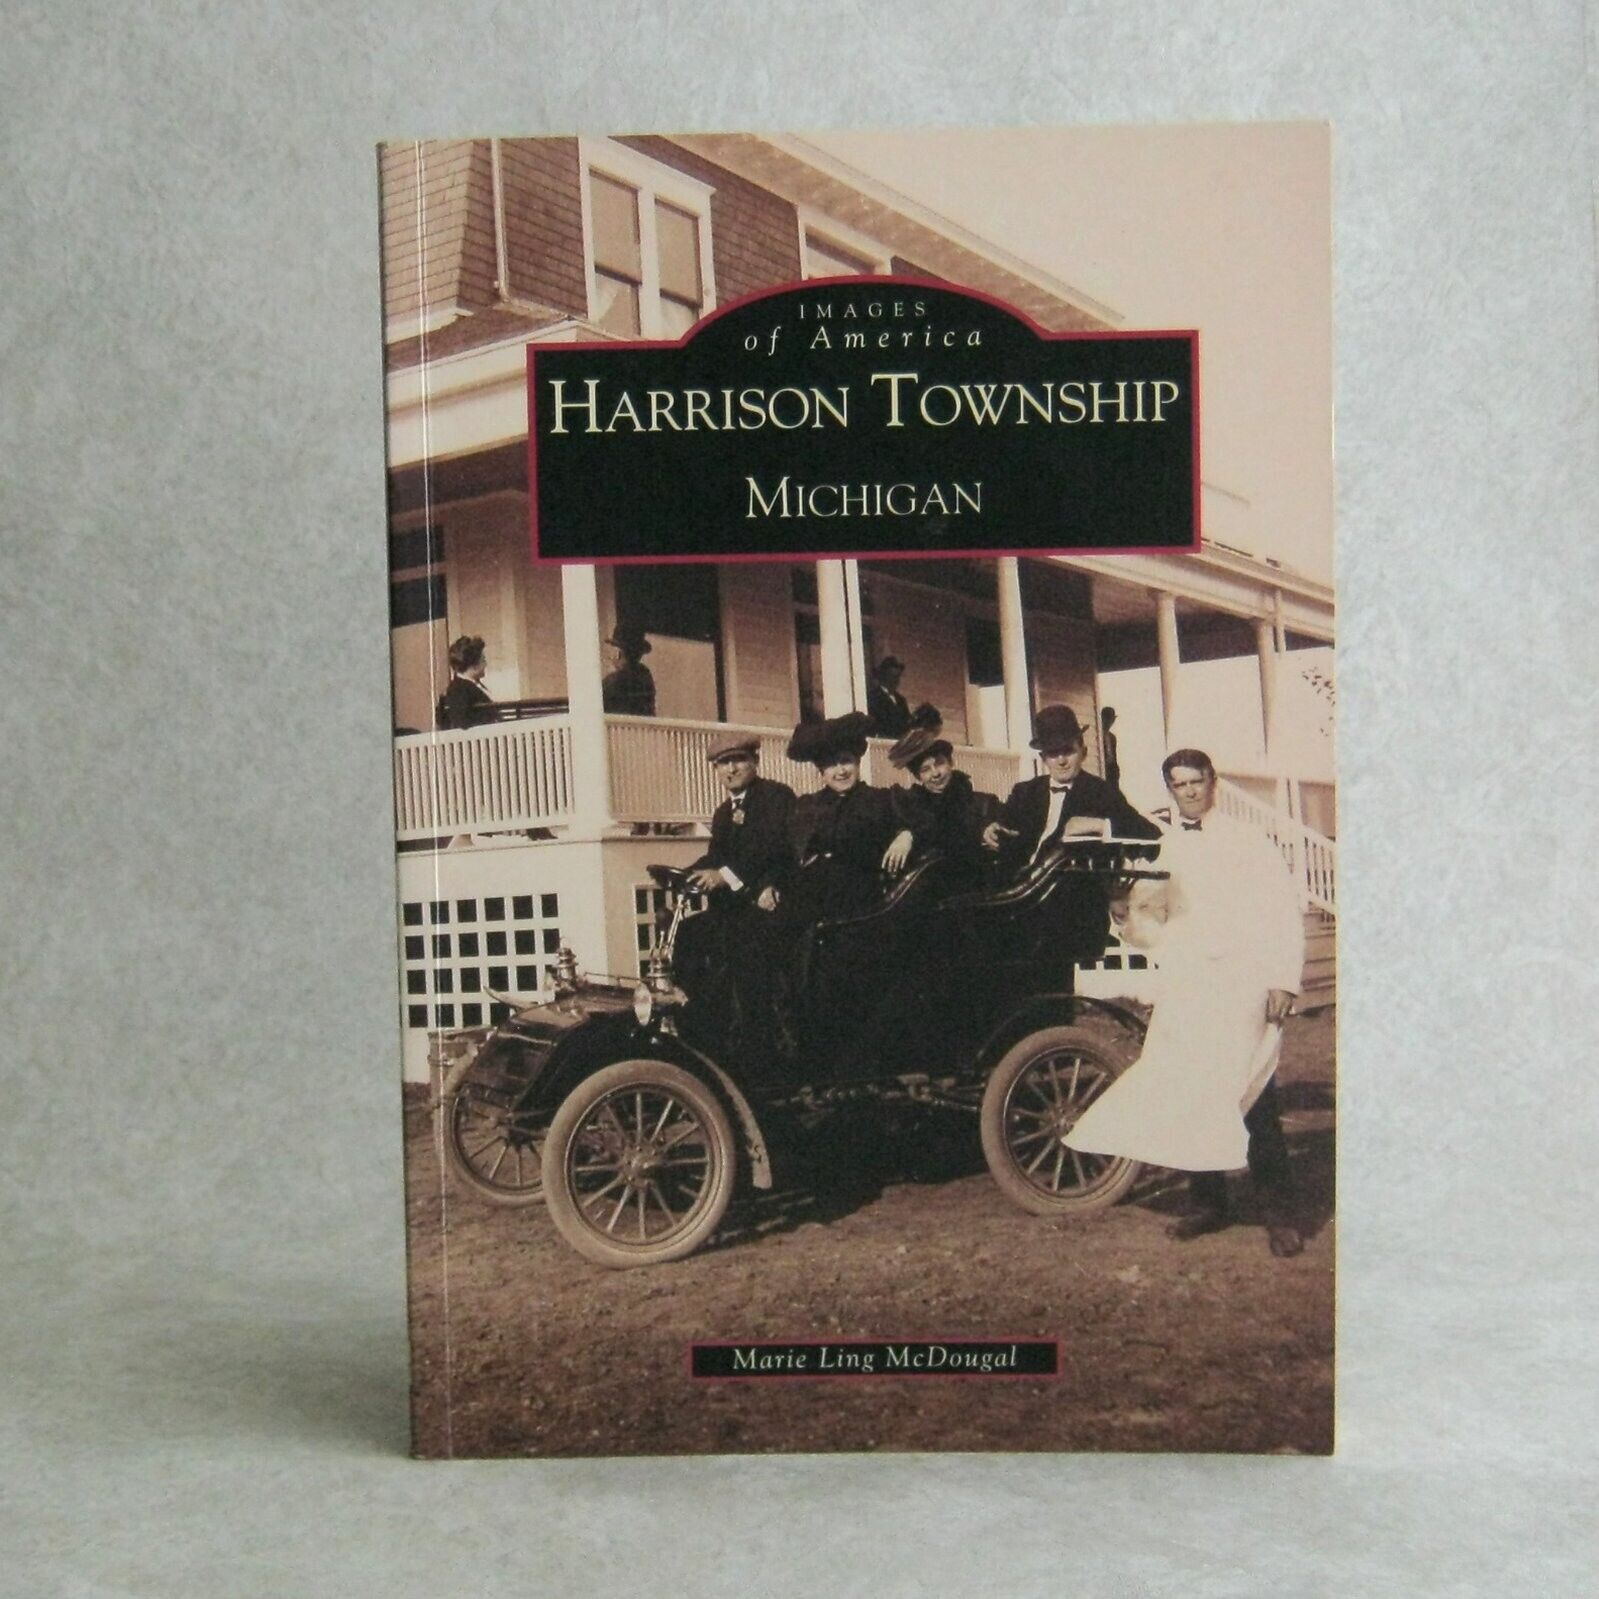 Harrison Township Michigan by Marie Ling McDougal Images of America History 2002